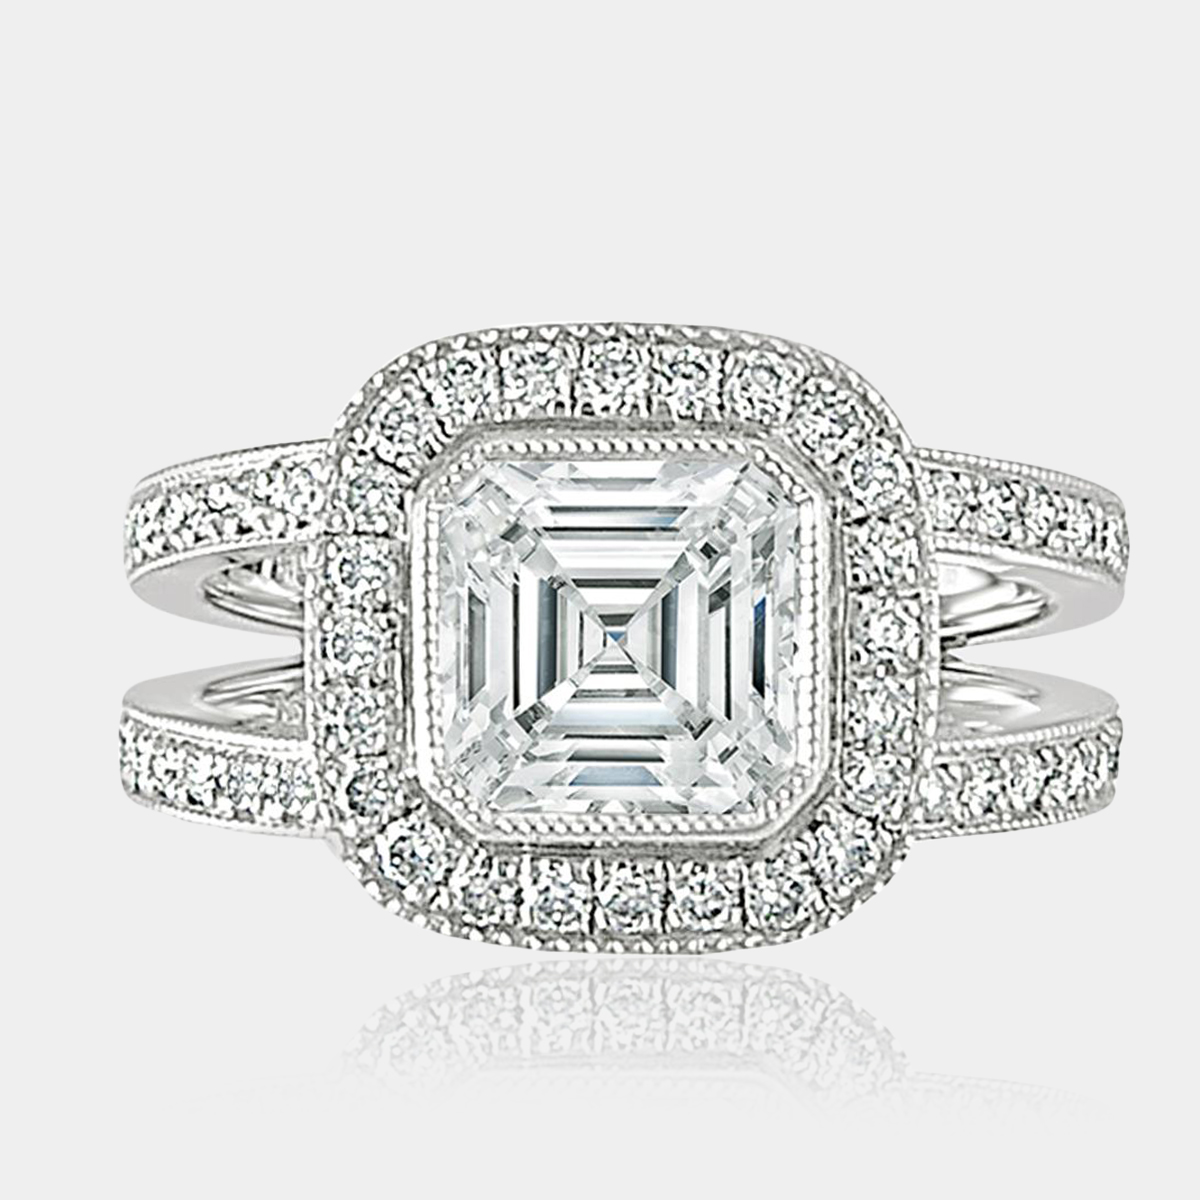 1.60 carat Asscher cut diamond ring featuring round brilliant cut diamond halo and split band with round brilliant cut bead set diamonds.